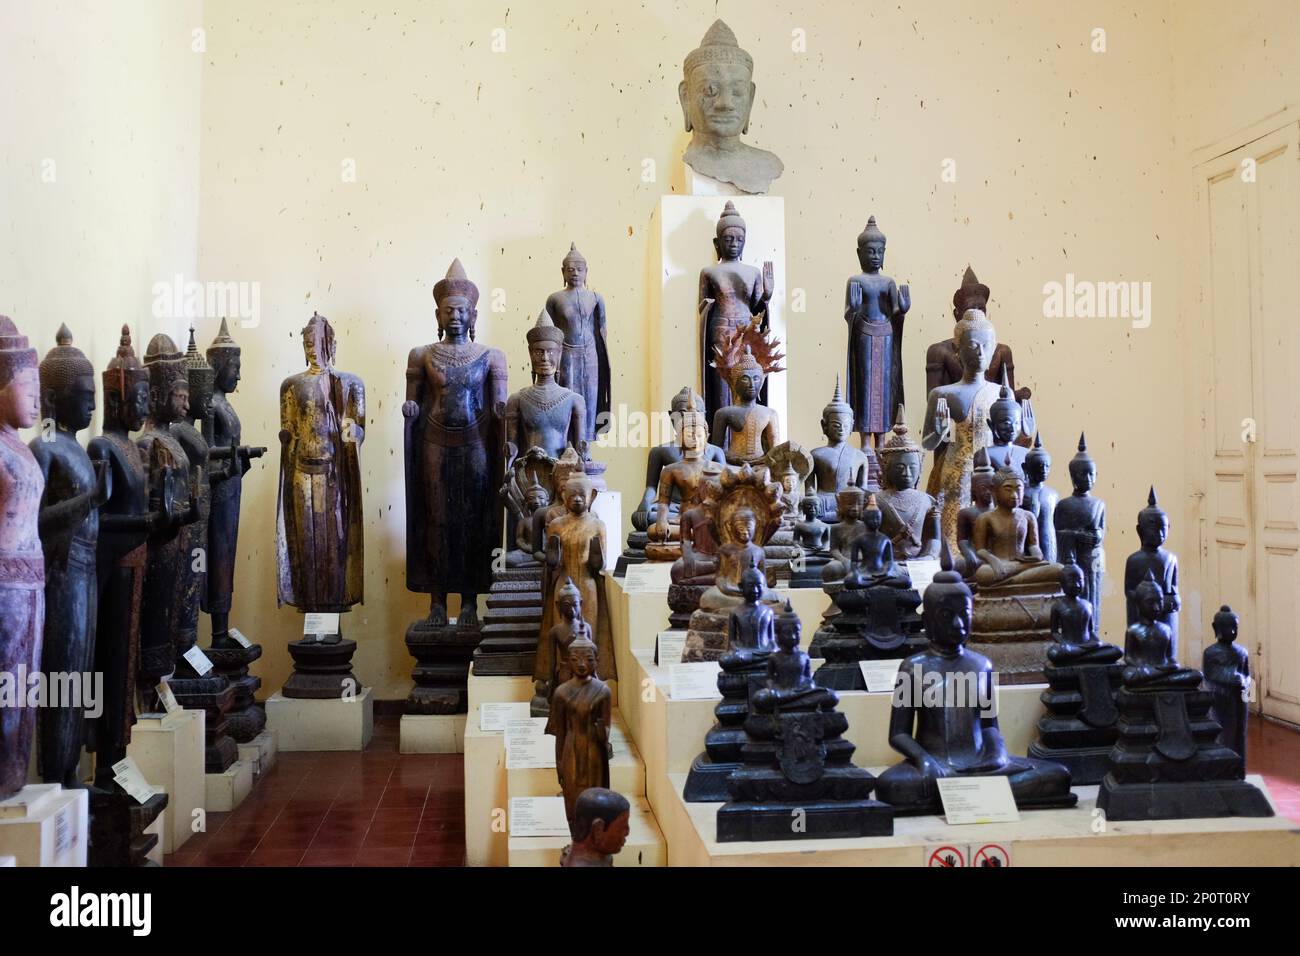 Various ancient Khmer Buddha statues in National Museum of Cambodia, Pnomh Penh. Travel photo, museum collection Stock Photo